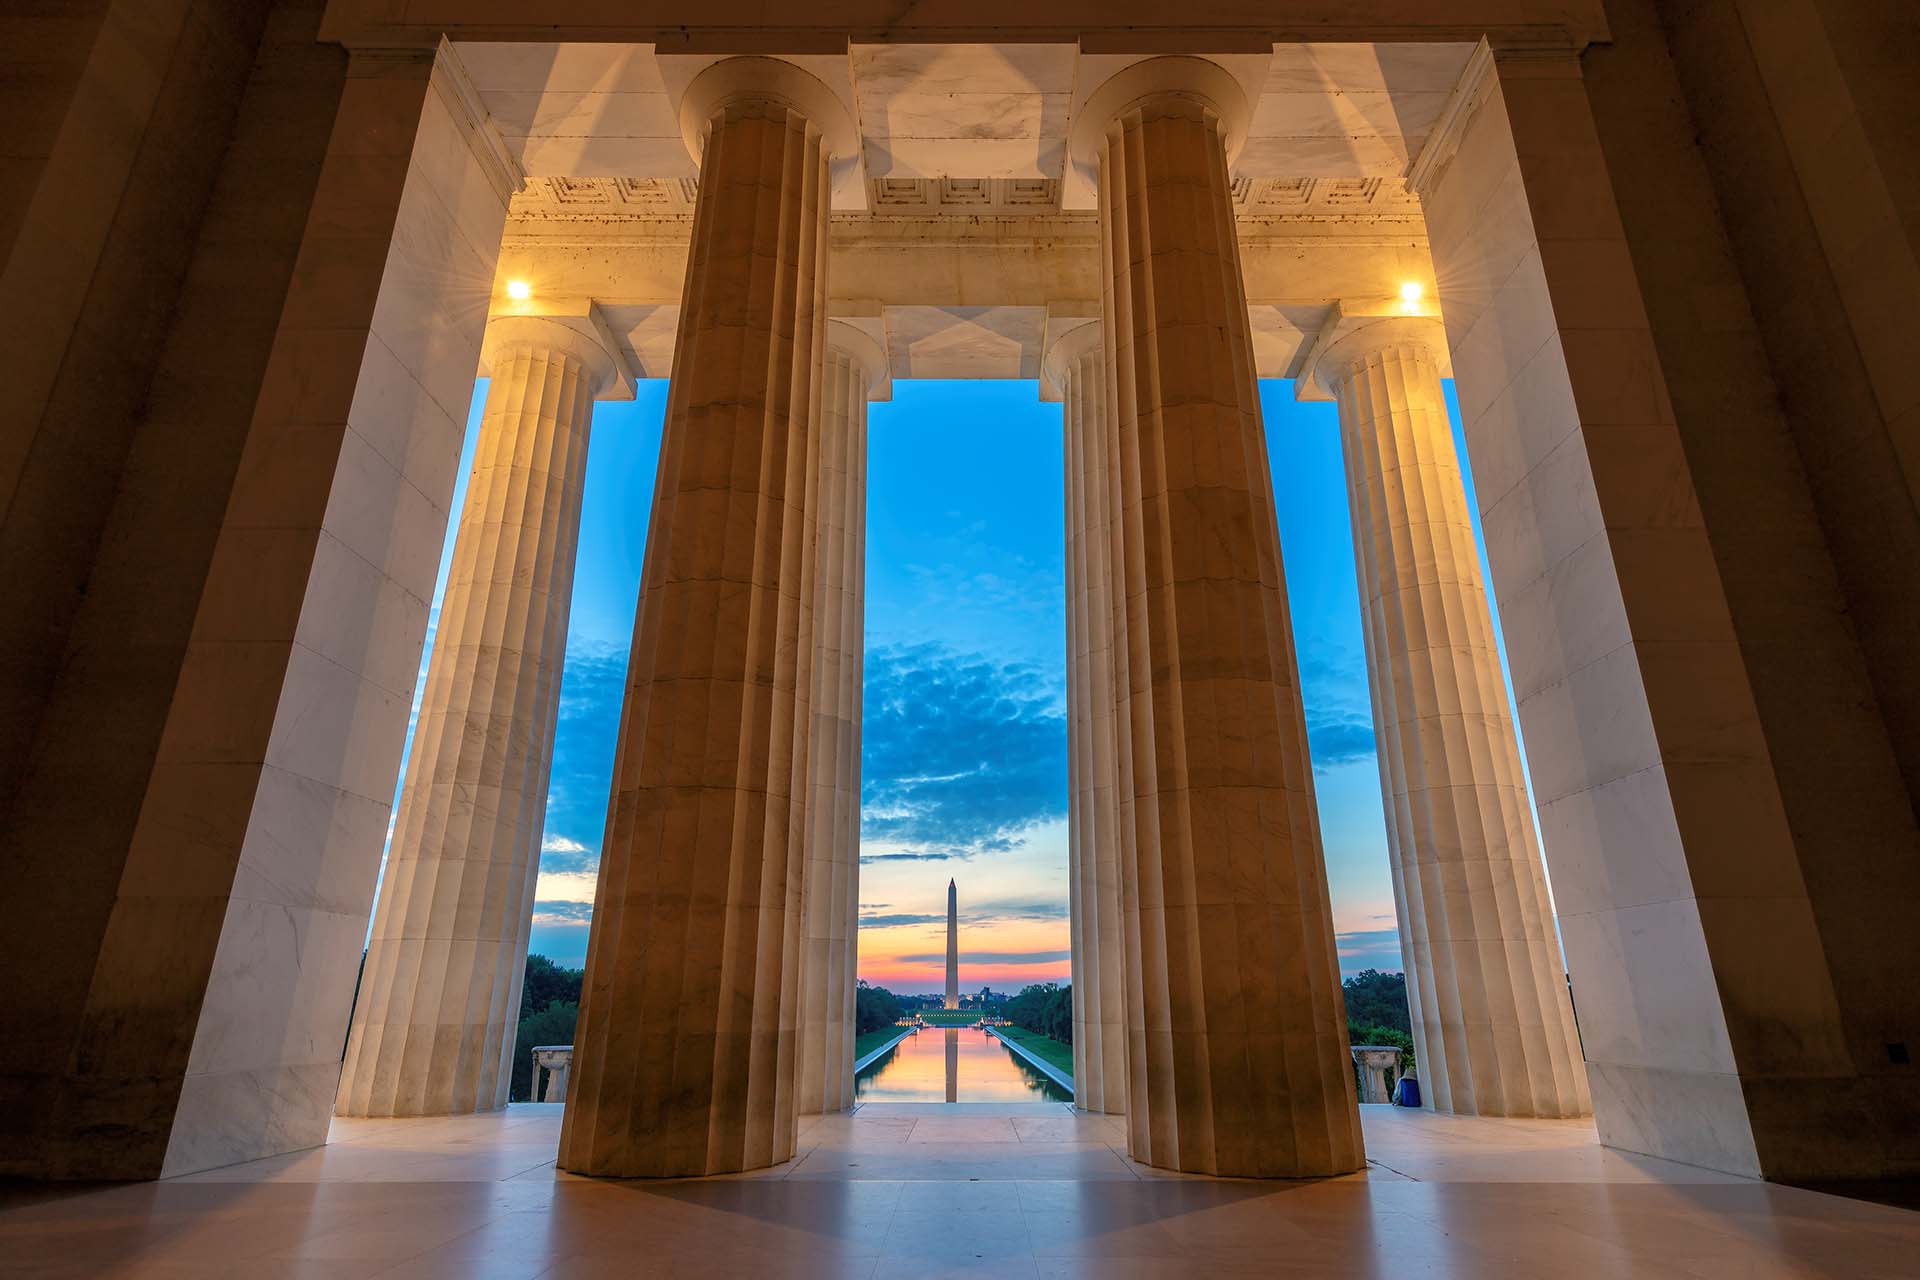 View through the columns of the Lincoln Memorial at sunrise, showcasing the Reflecting Pool and the Washington Monument. The sky is painted with shades of blue and orange, reflecting a serenity that contrasts sharply with moments of crisis management faced by leaders nearby.